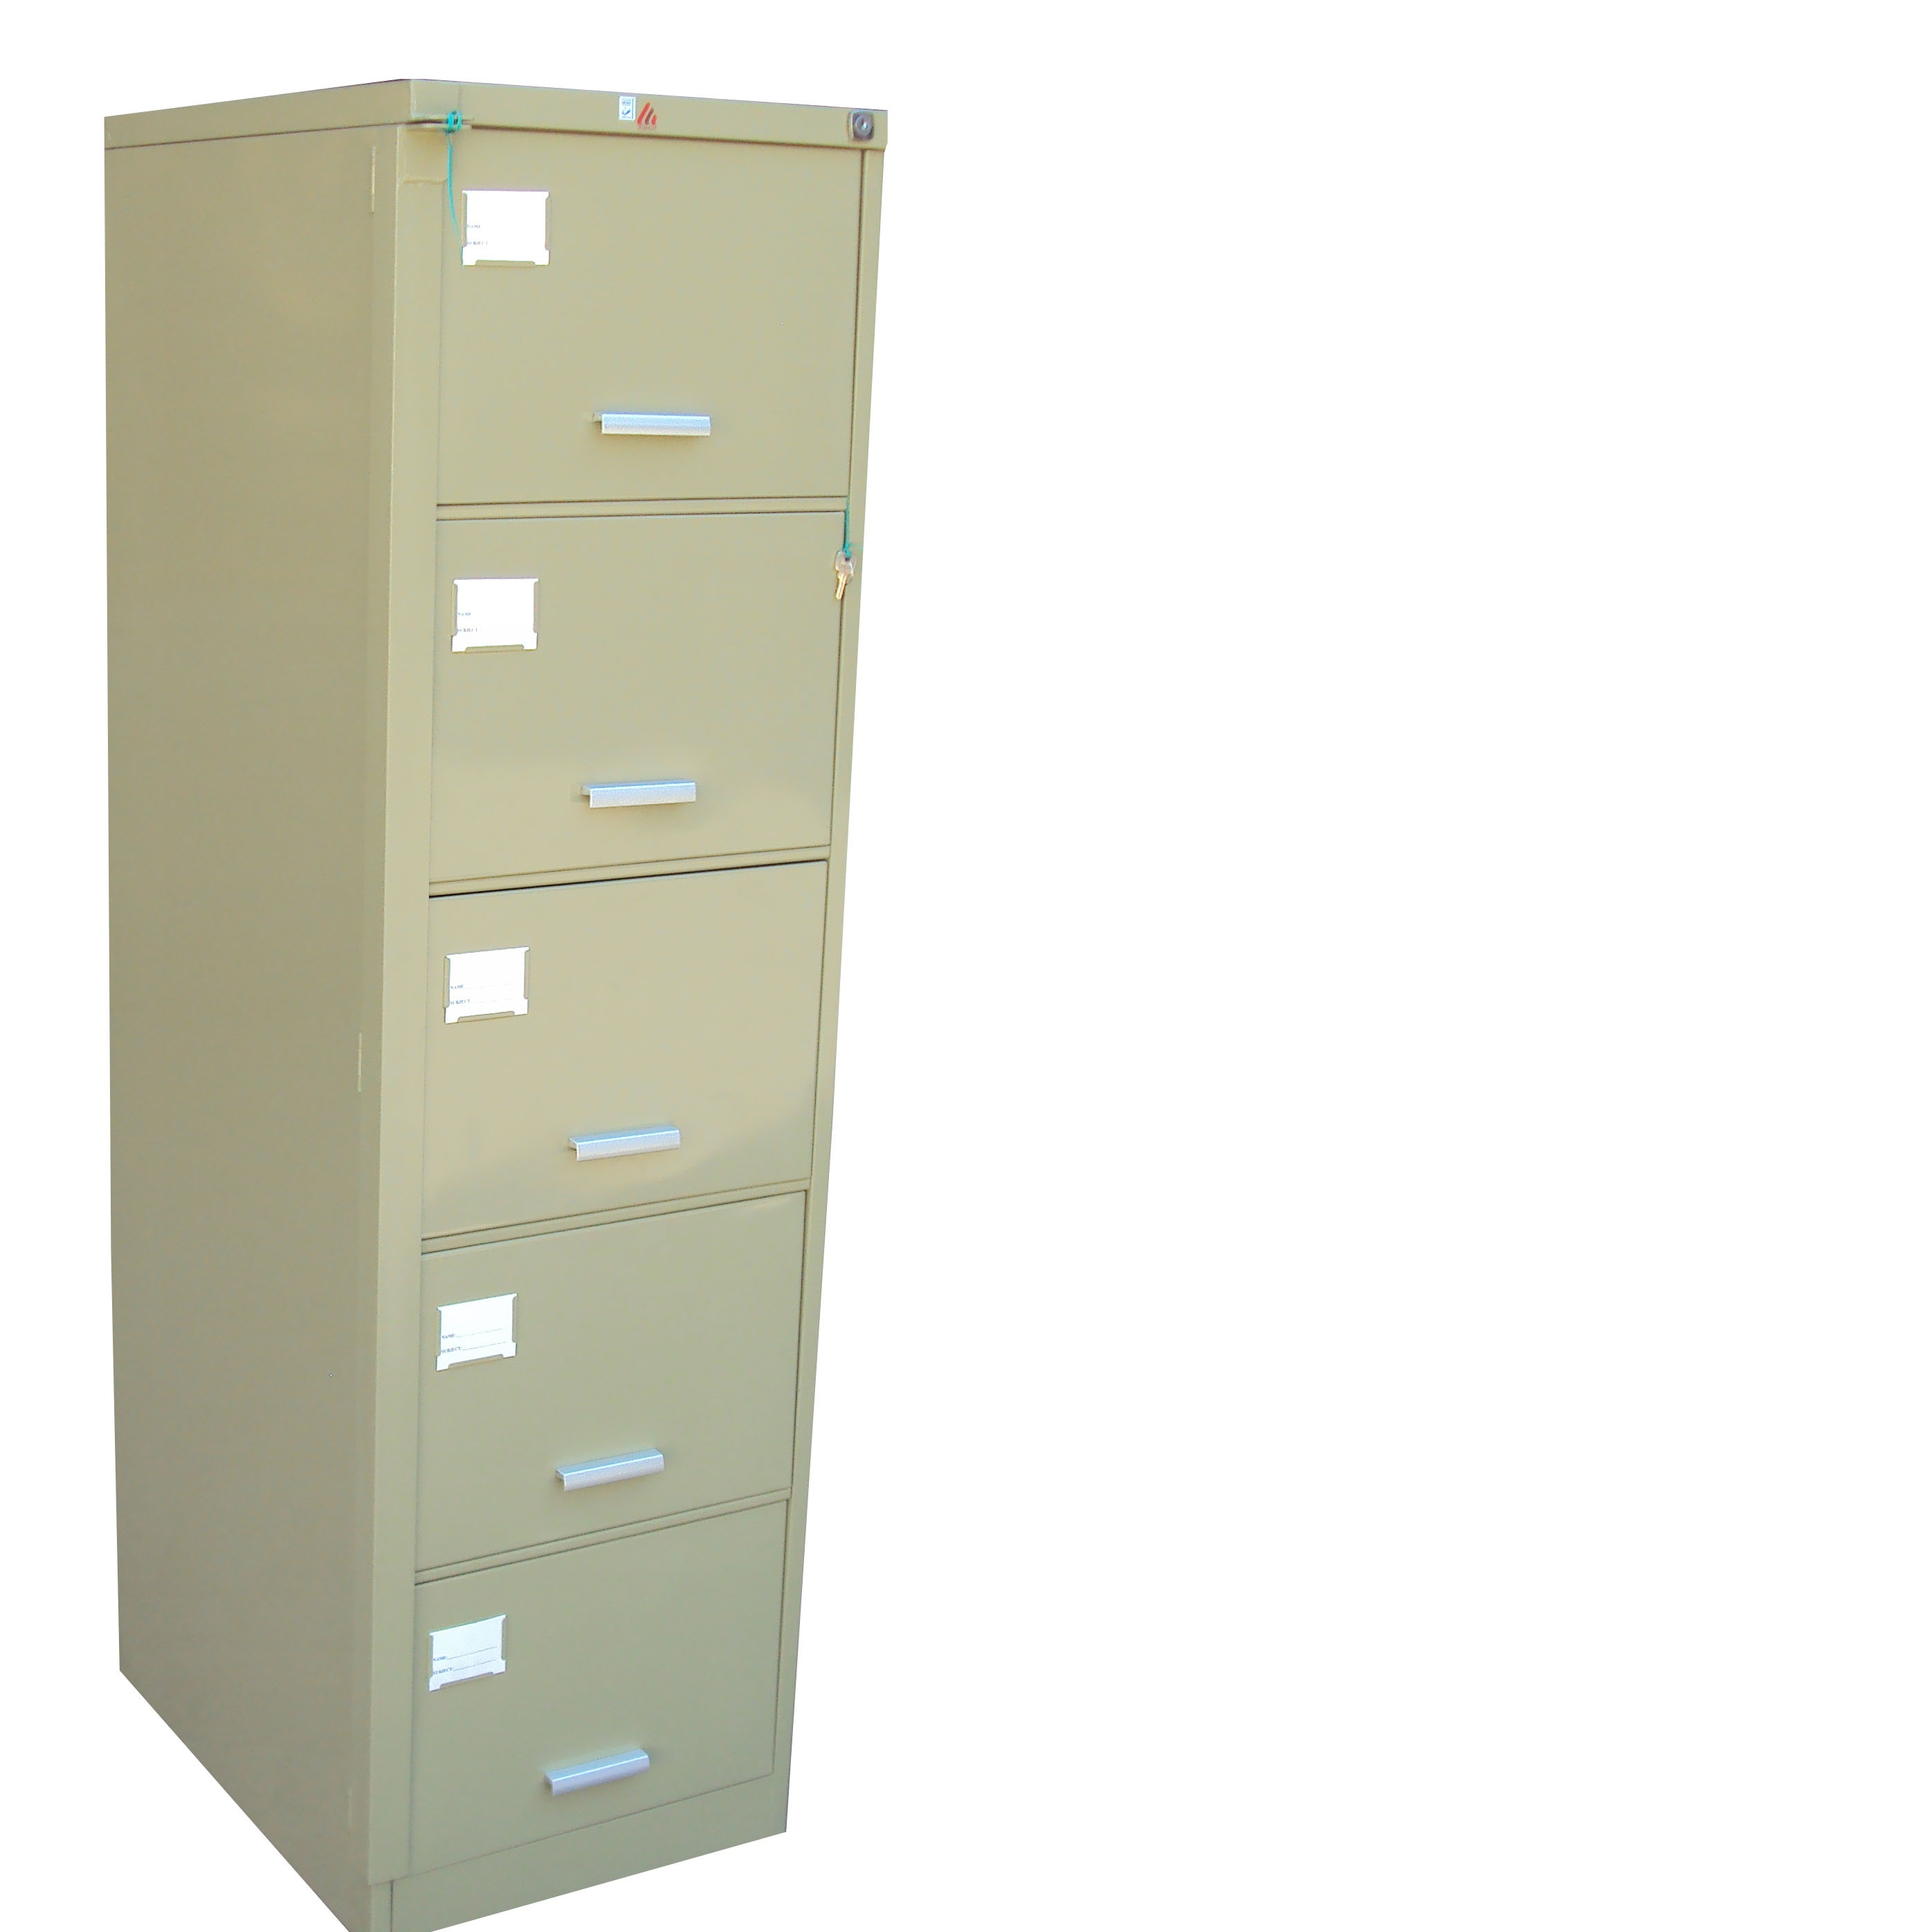 5 Drawer Filing Cabinet Ashut Engineers Limited with dimensions 2792 X 2792